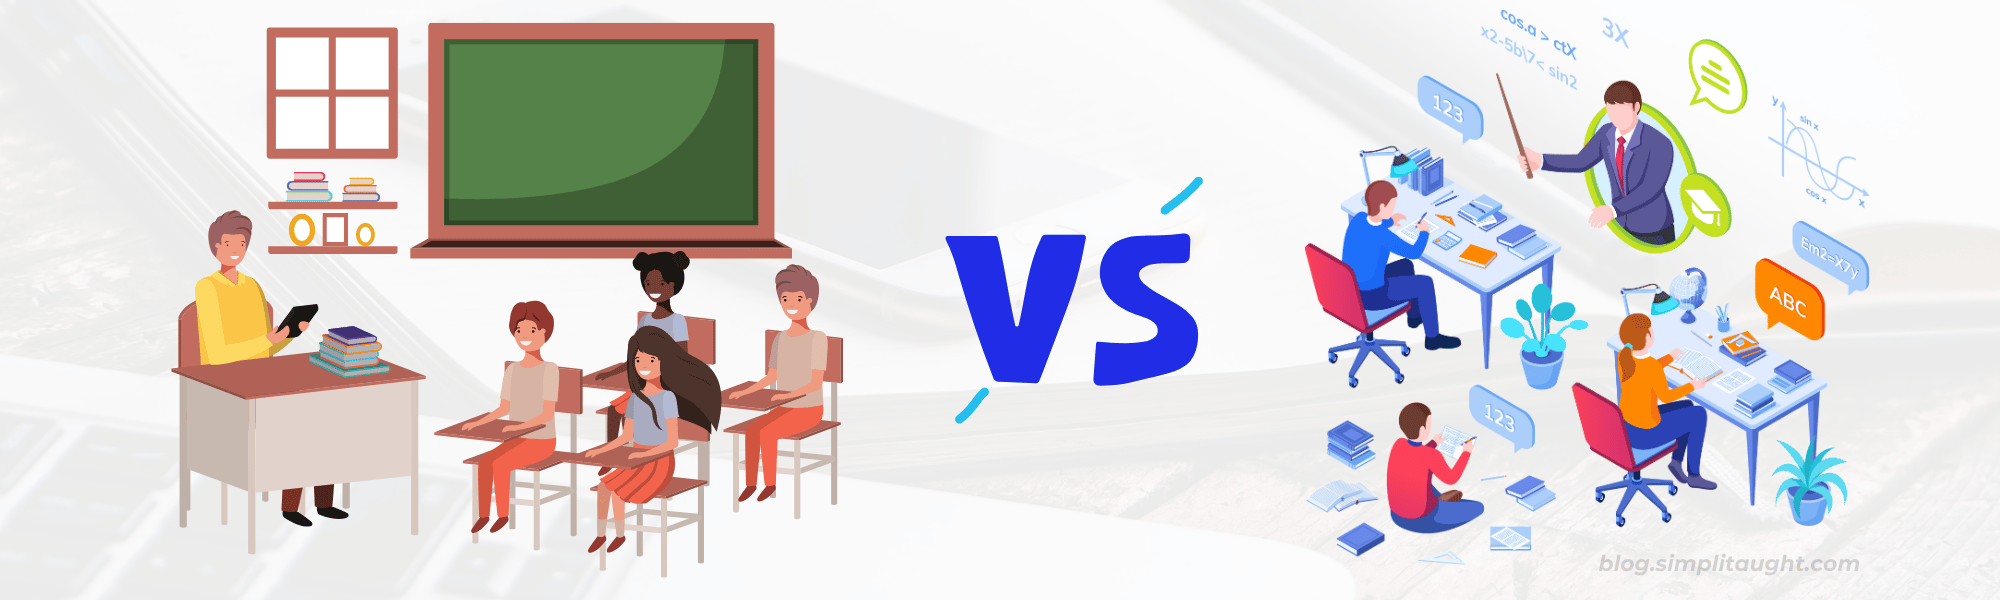 online learning vs classroom learning thesis